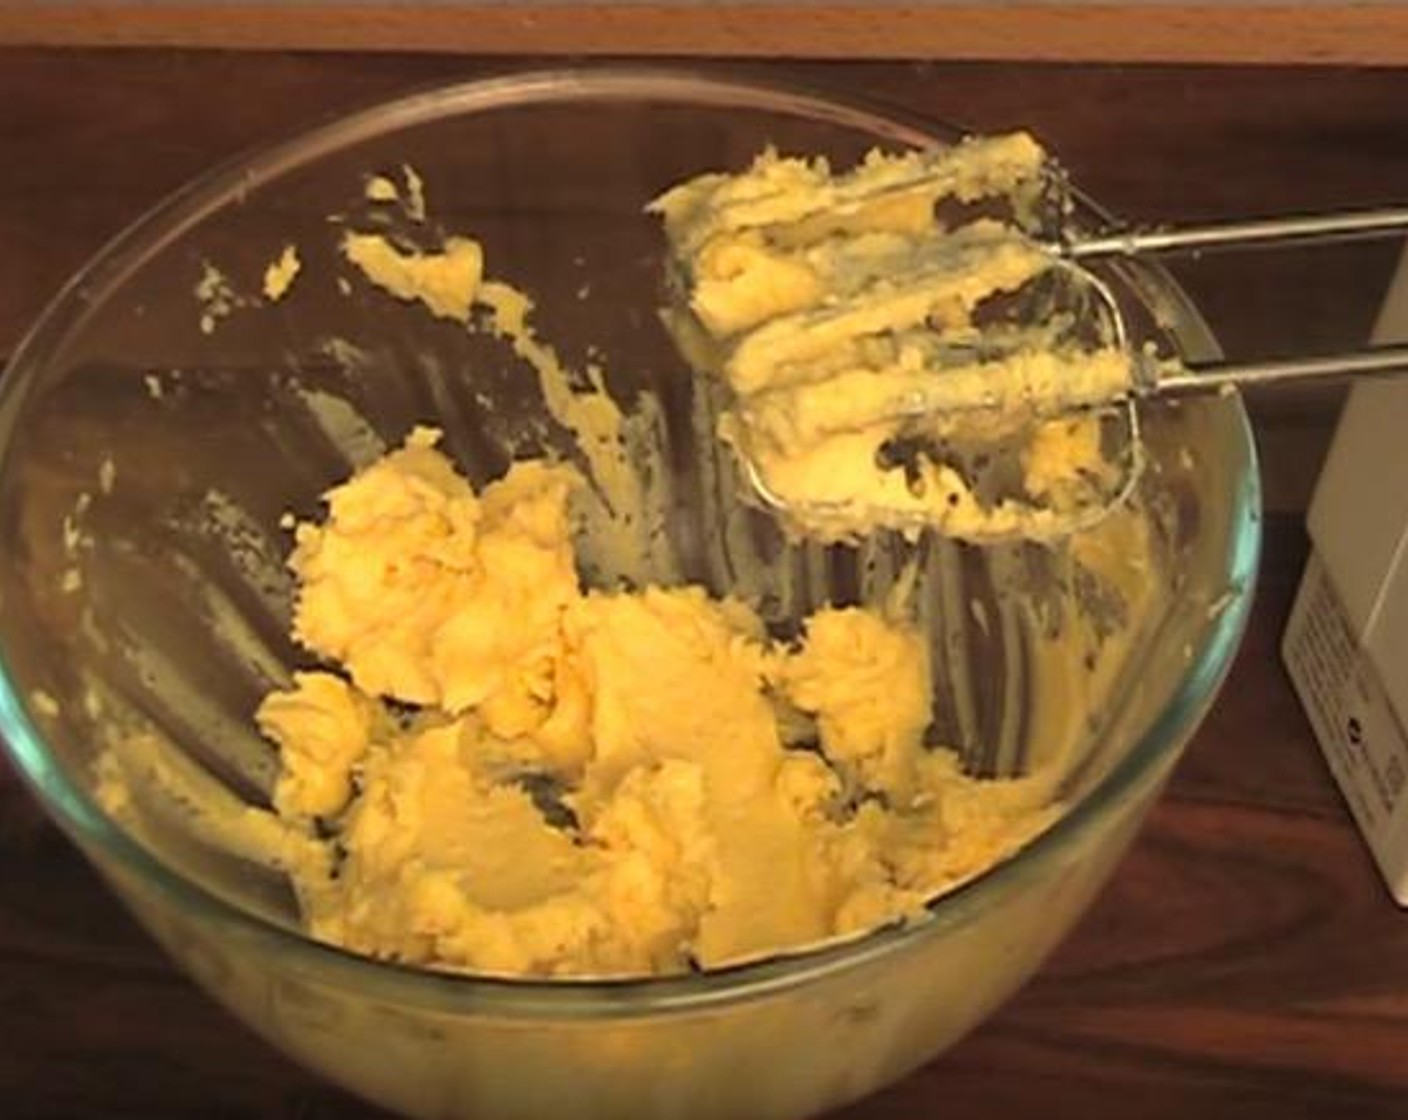 step 2 In a mixing bowl, add Butter (3/4 cup), Caster Sugar (1/2 cup) and Vanilla Extract (1 tsp). Using an electric mixer, beat together until fluffy.